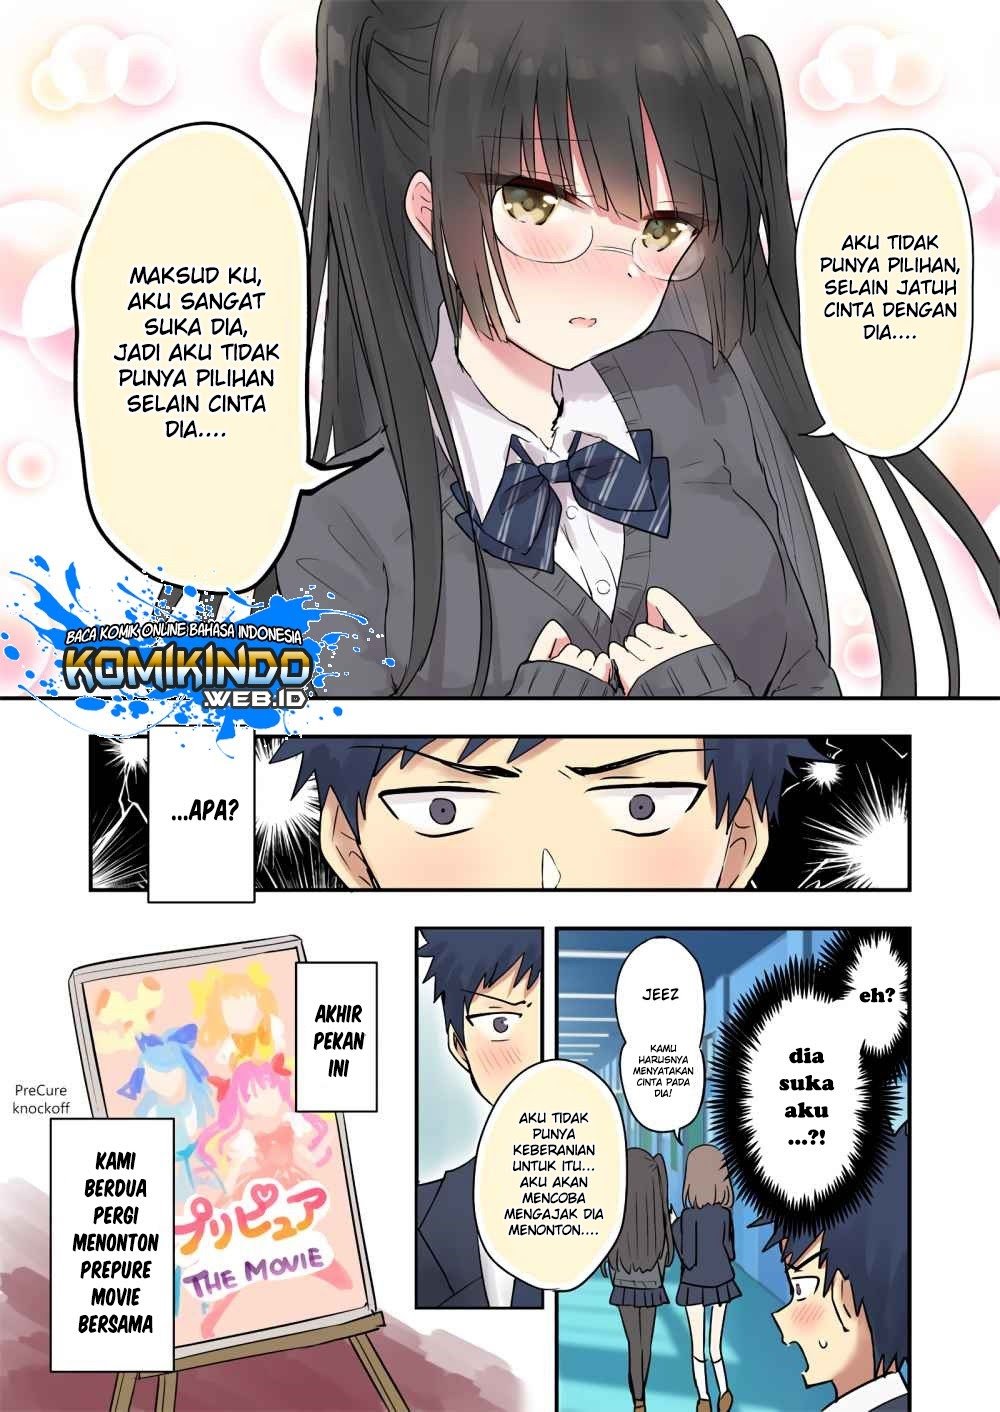 Baca The Story of a High-Schooler Who Wanted a Girlfriend but Had a Sour Face [Kouhai Route] Chapter 0  - GudangKomik